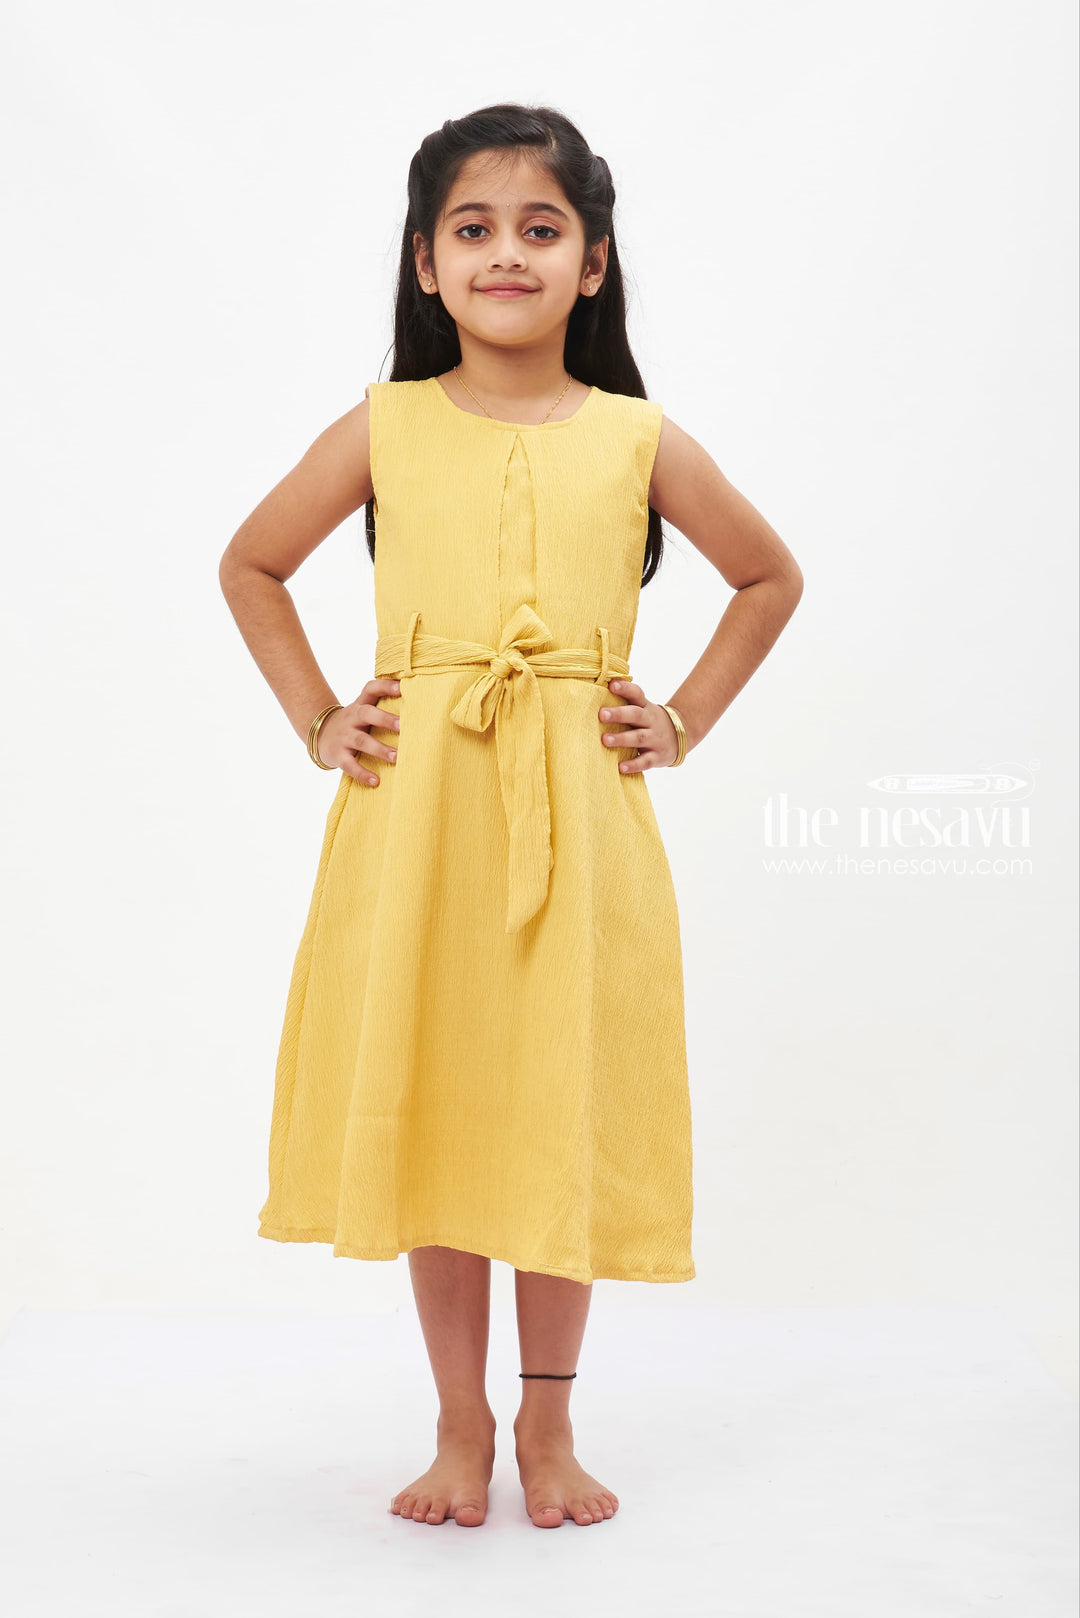 The Nesavu Girls Fancy Frock Sunny Yellow Bow Detail Cotton Dress: Bright and Beautiful for Girls Nesavu 18 (2Y) / Yellow GFC1220B-18 Girls' Vibrant Yellow Cotton Dress | Sleeveless Bow Frock | The Nesavu